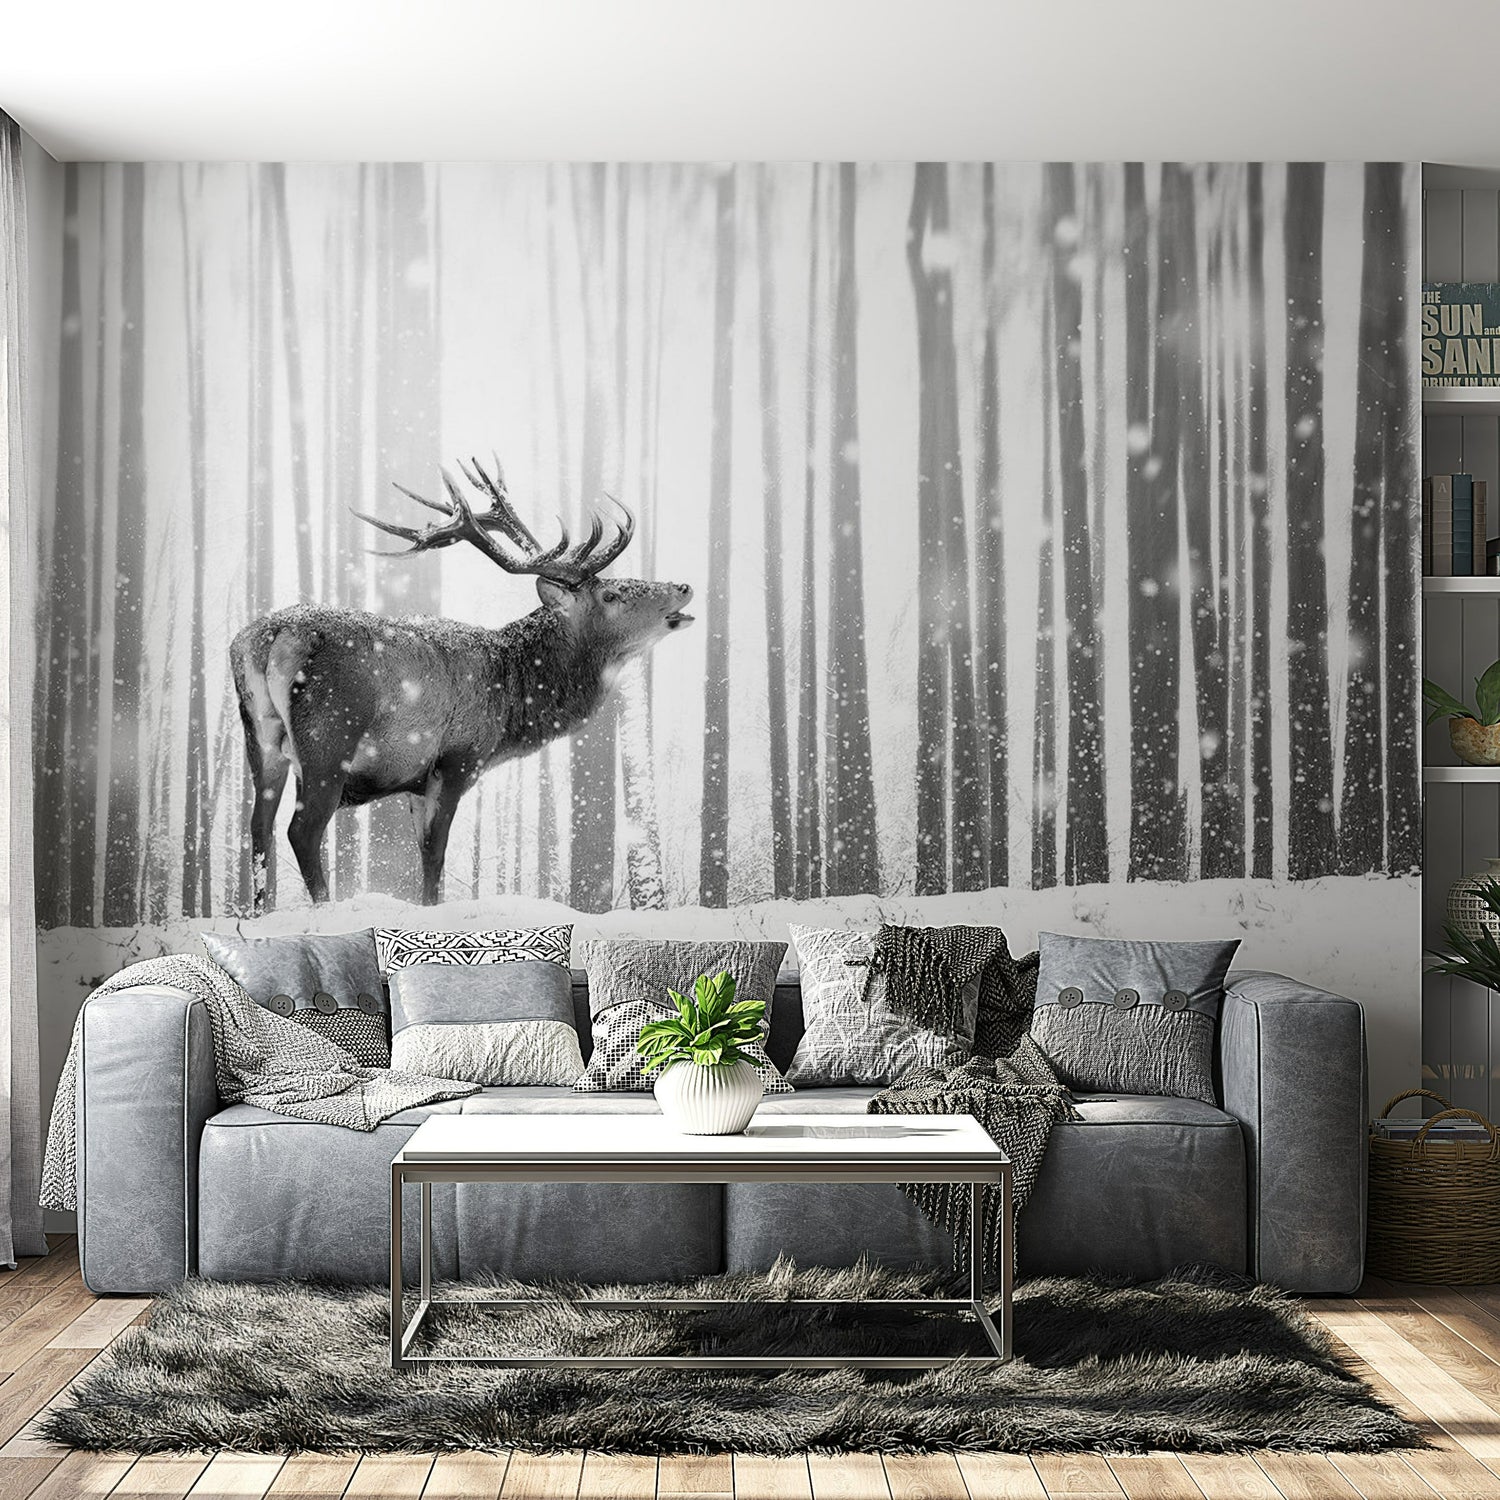 Peel & Stick Animal Wall Mural - Deer In The Snow Black And White - Removable Wall Decals